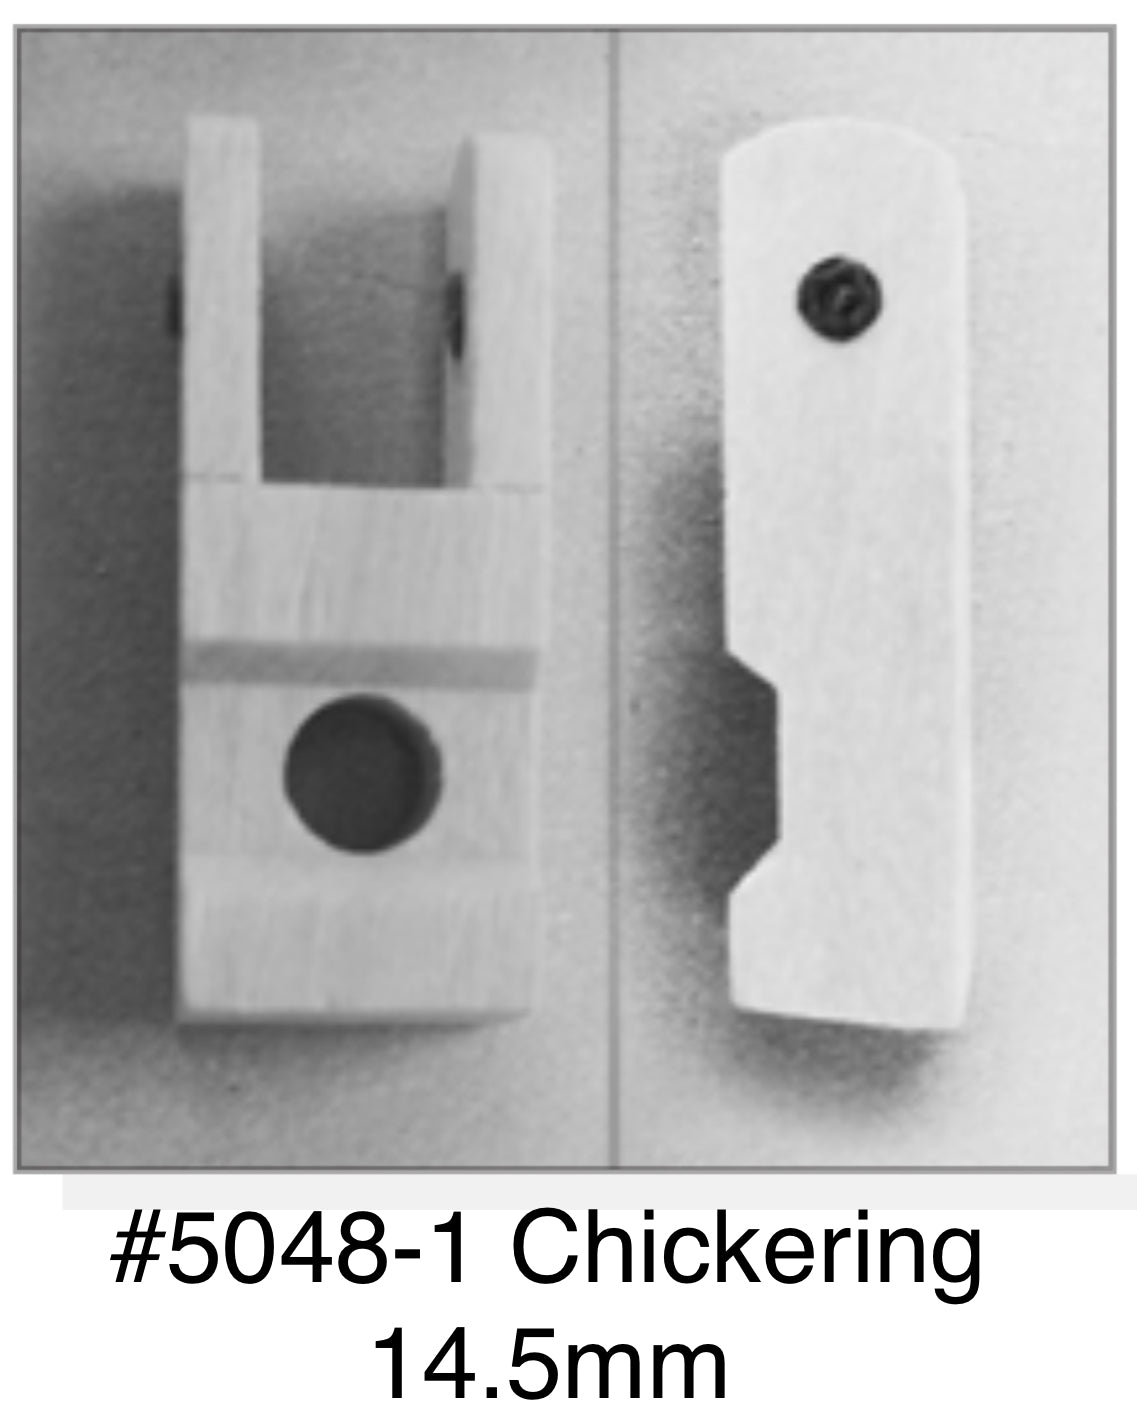 Chickering type Wippen flanges, 14.5mm